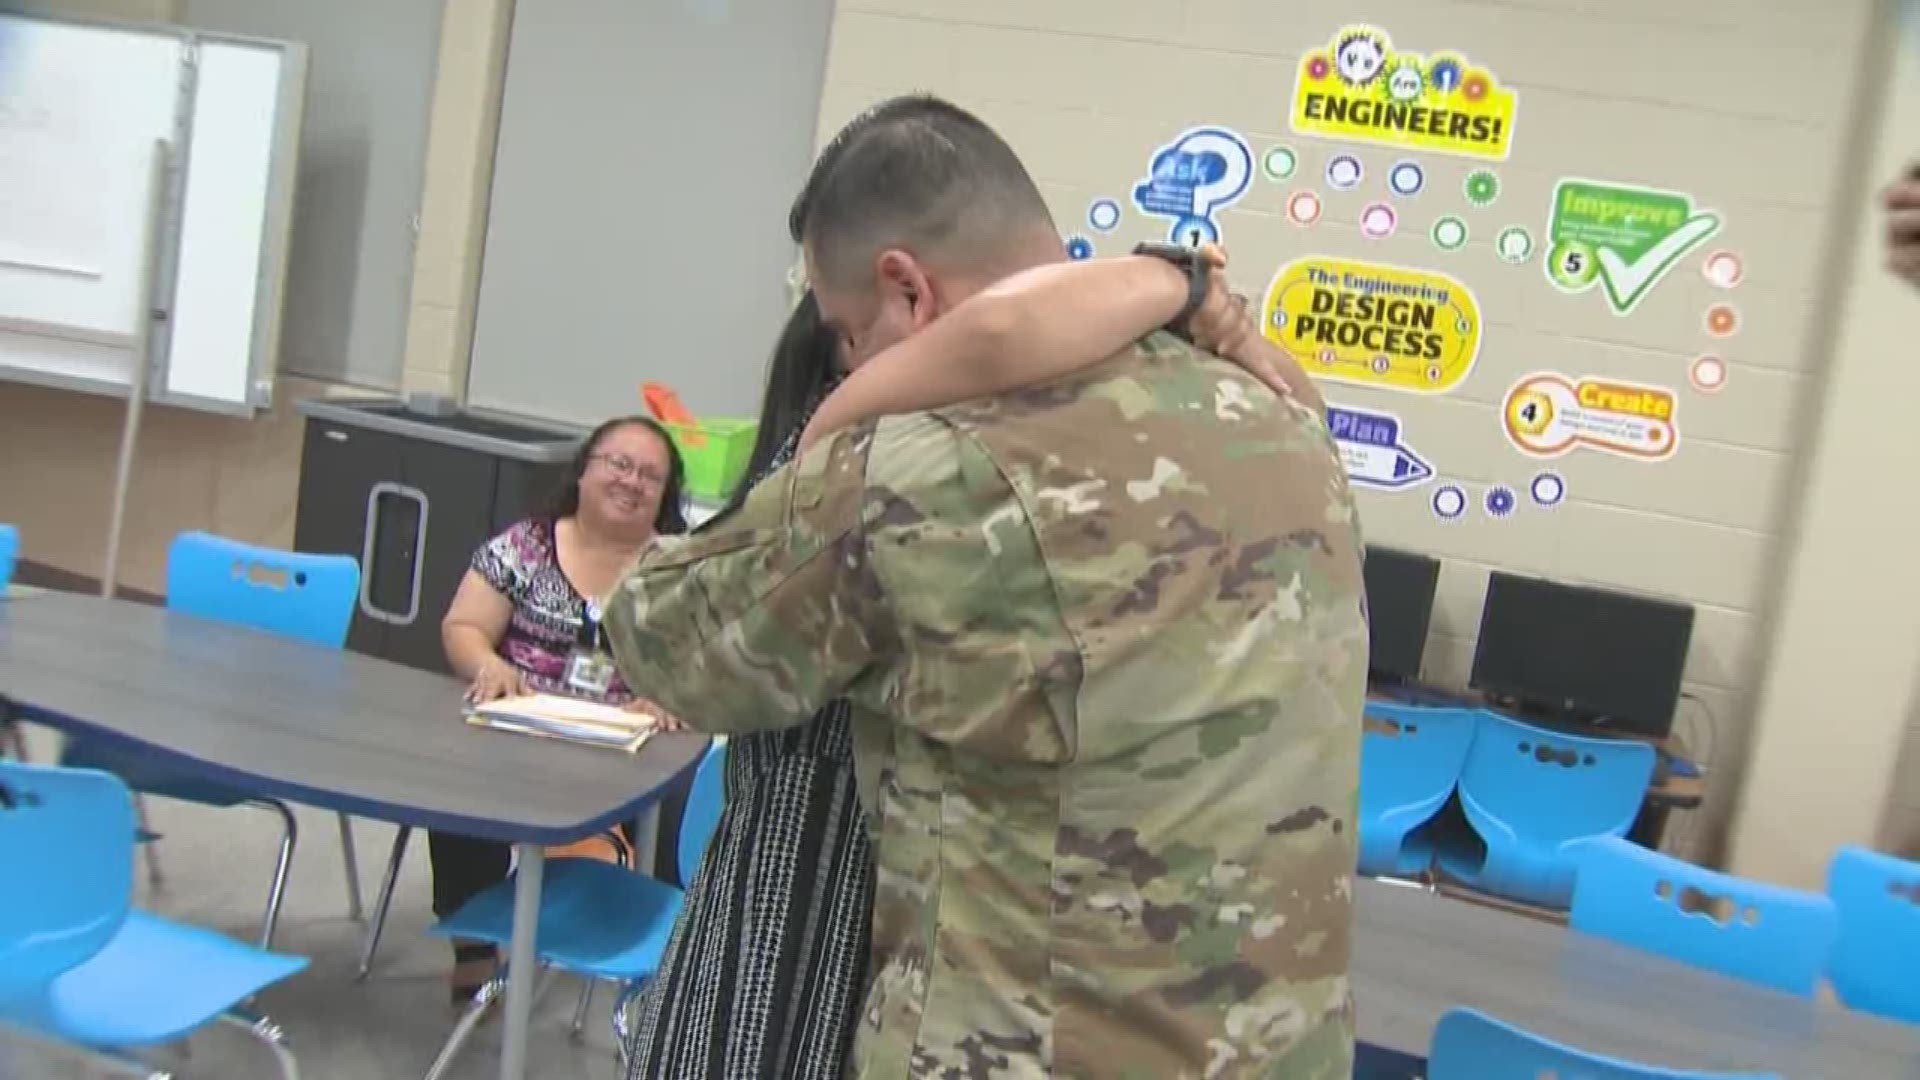 U.S. Soldier John Garces decided to surprise his wife and son at the school after being deployed in South Korea for seven months. The emotional reunion was successful thanks to the help of his parents and school Principal Marianela Gonzalez-Sanchez.